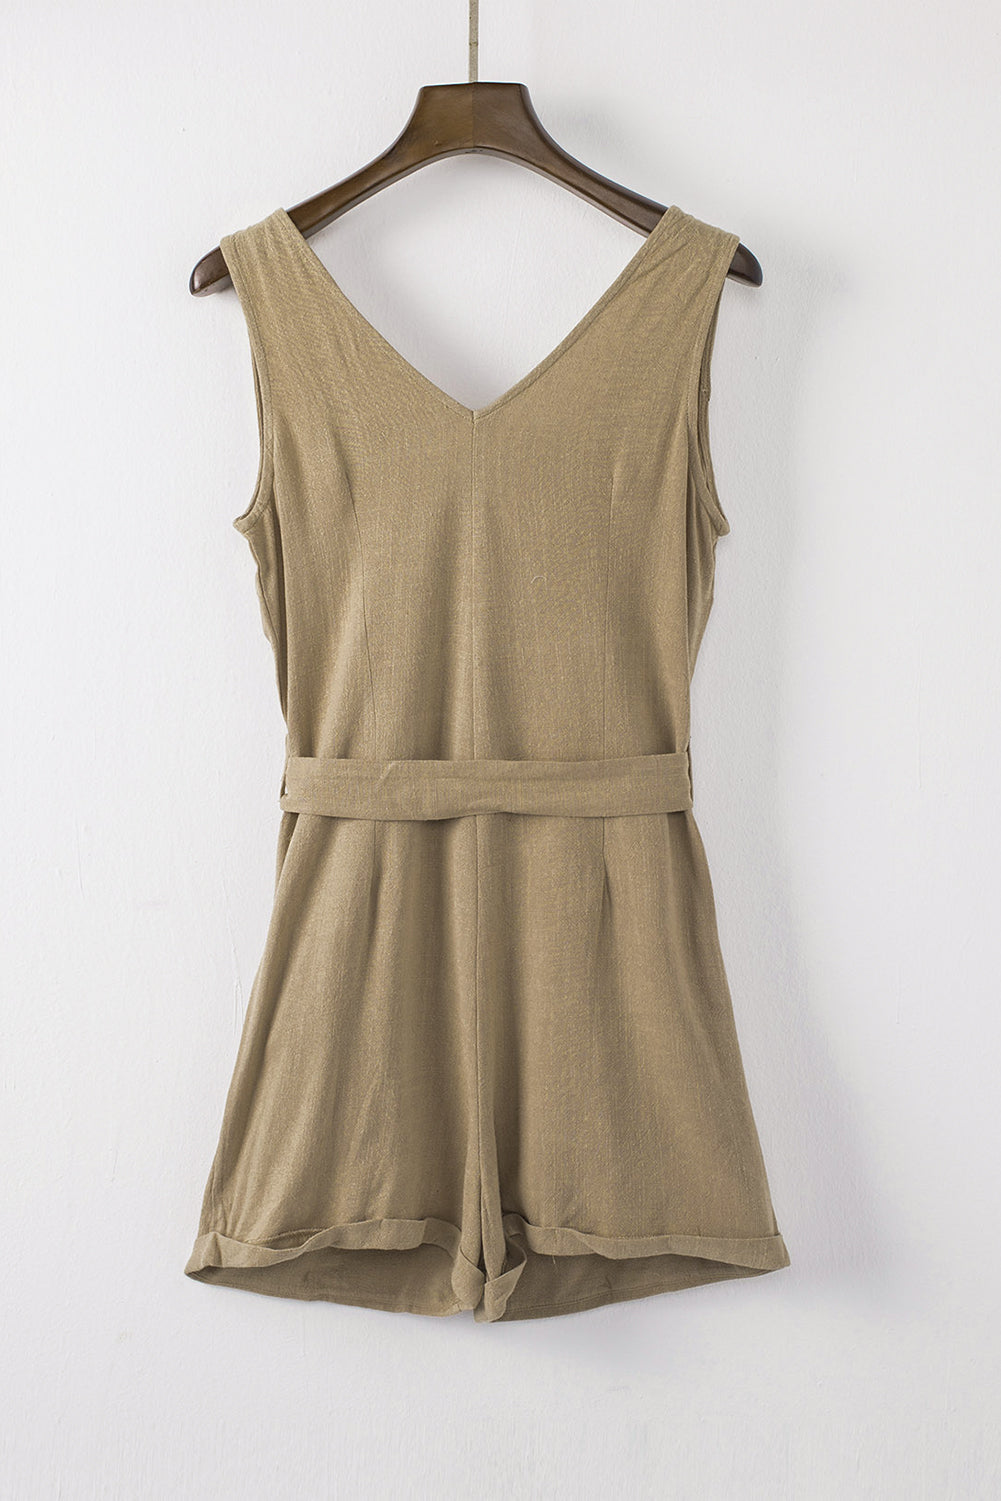 Sophisticated Safari Tie-Waist Buttoned Plunge Sleeveless Romper Small-2XL